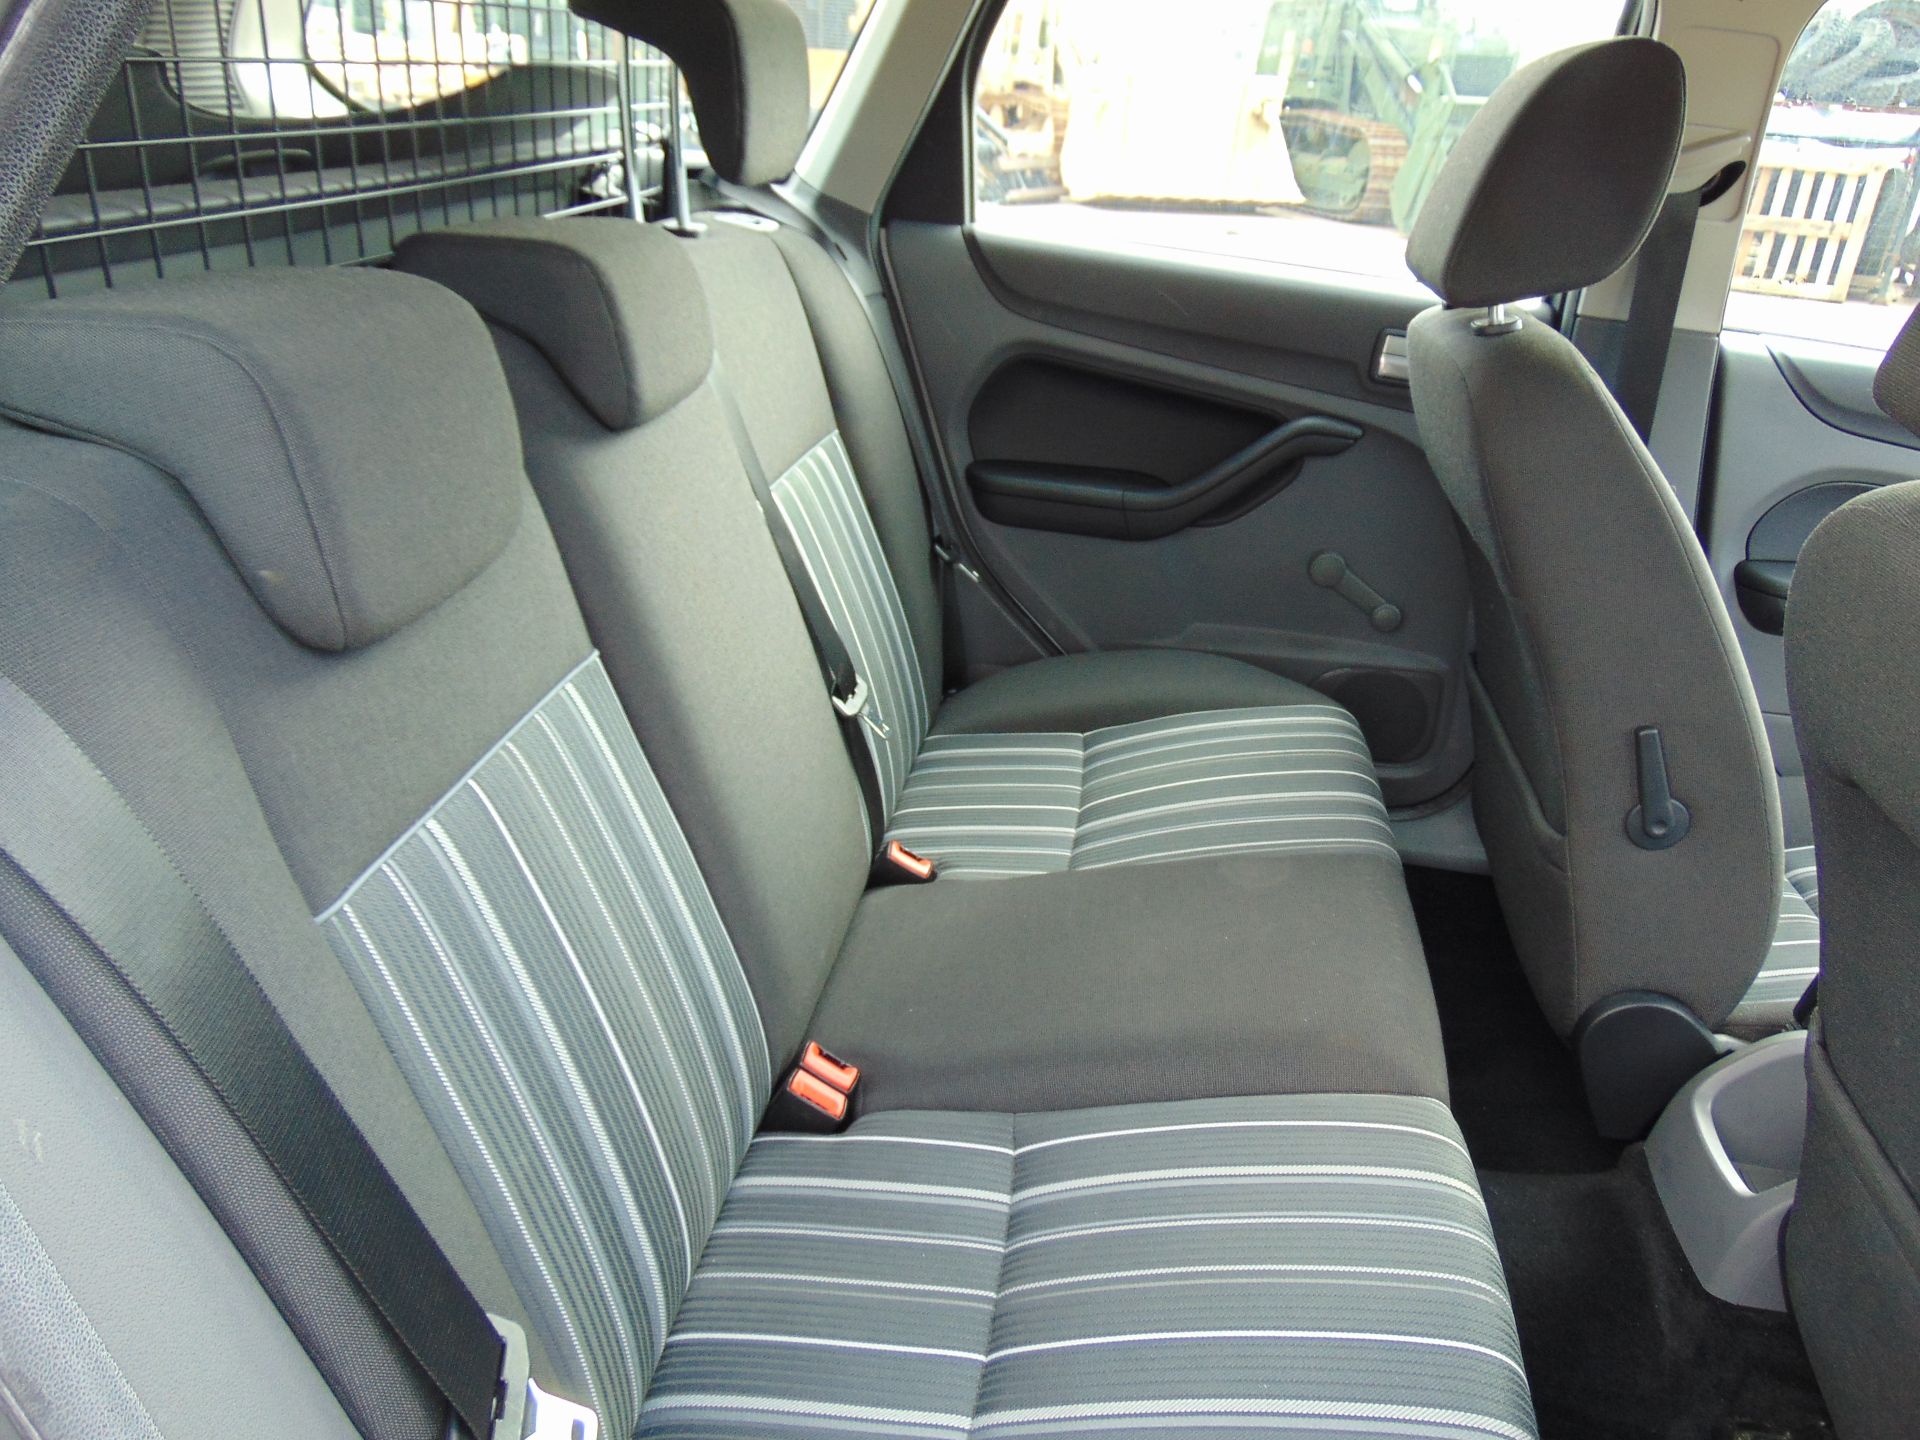 2009 Ford Focus Style 1.8l TDi Estate - Image 14 of 15